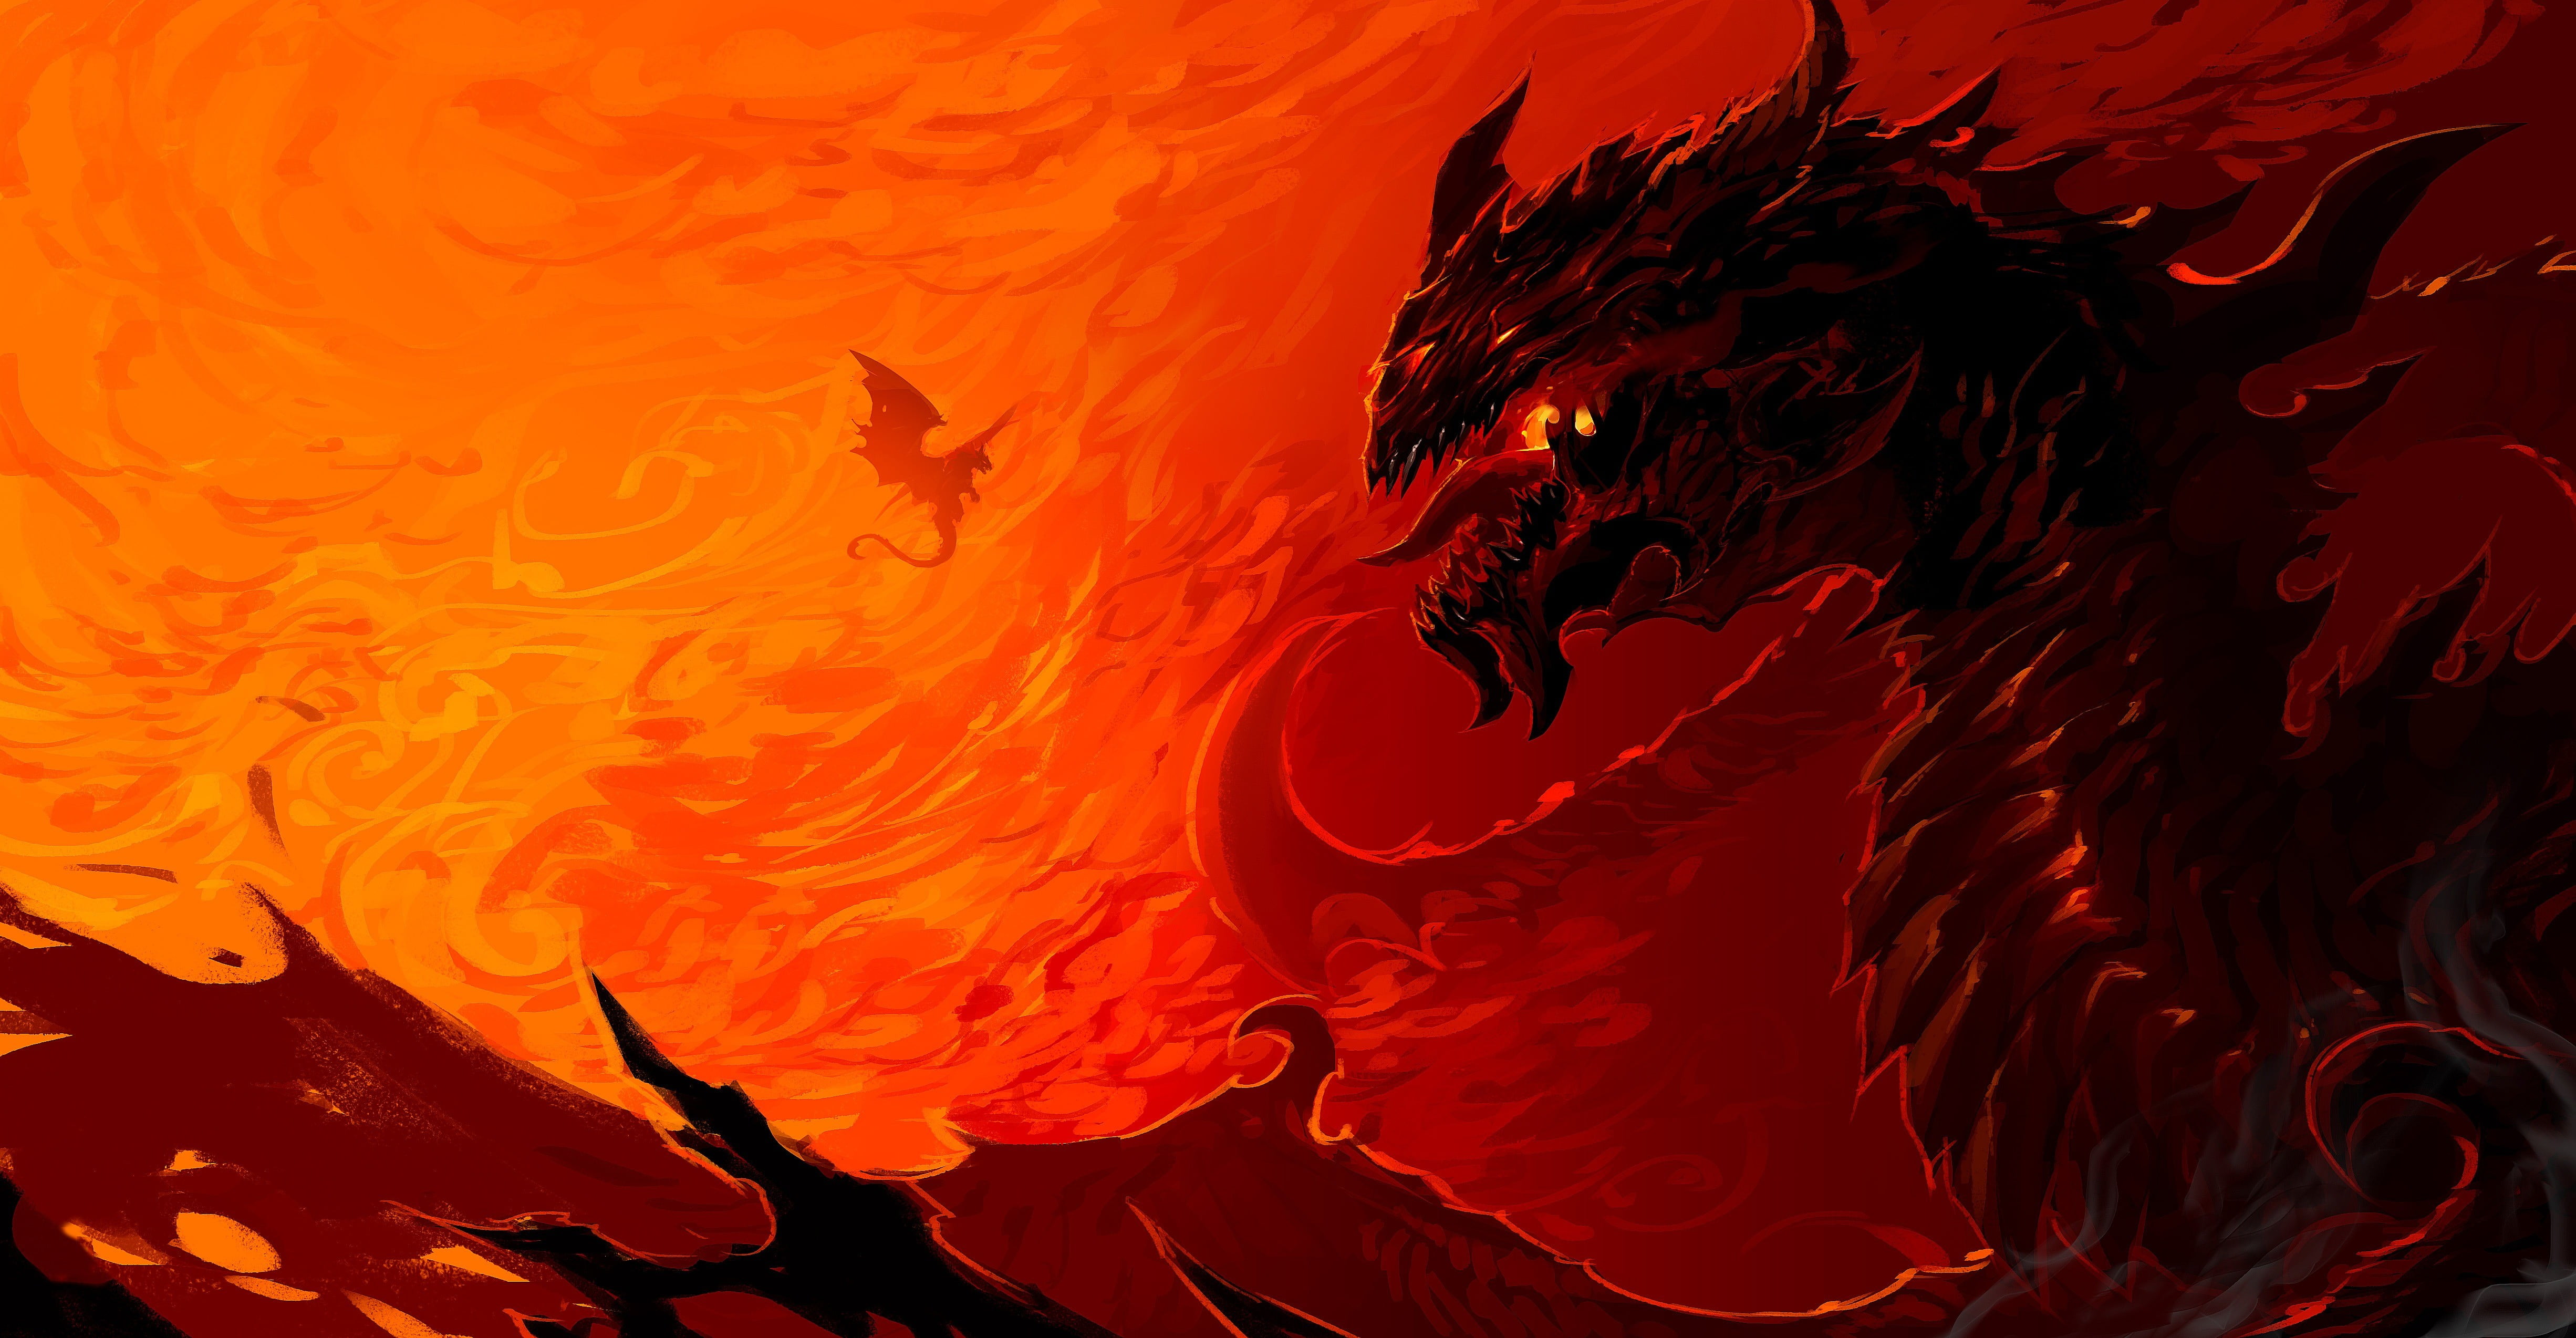 Discover 73+ cool wallpapers dragon - in.cdgdbentre